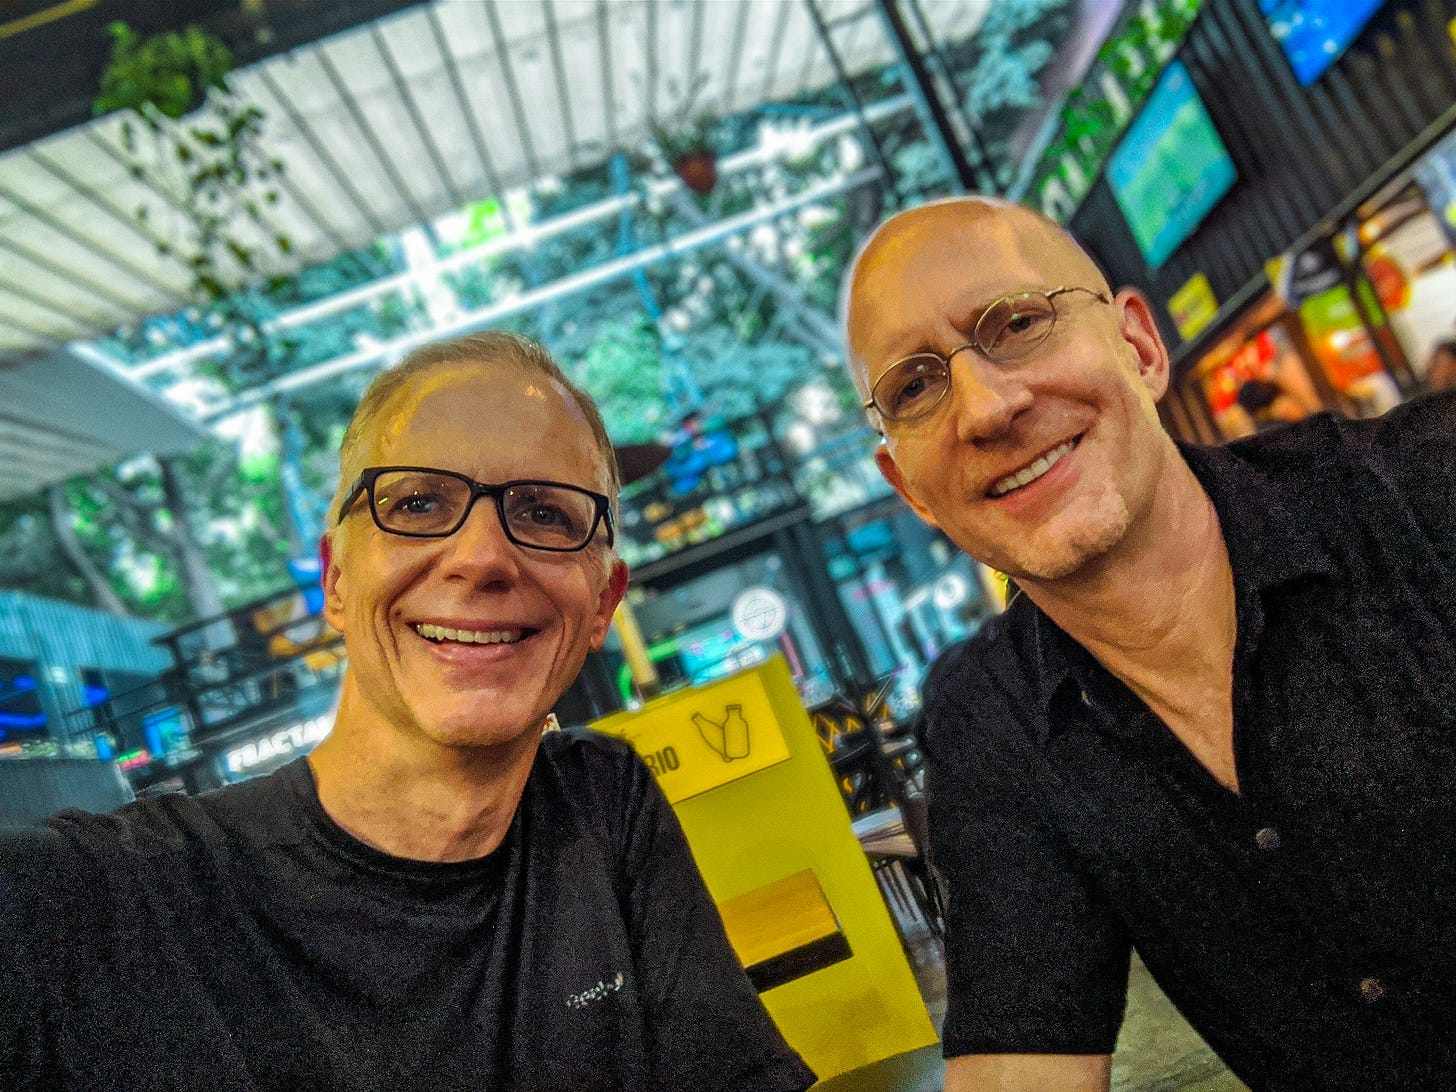 Michael Jensen and Brent Hartinger in Mexico City